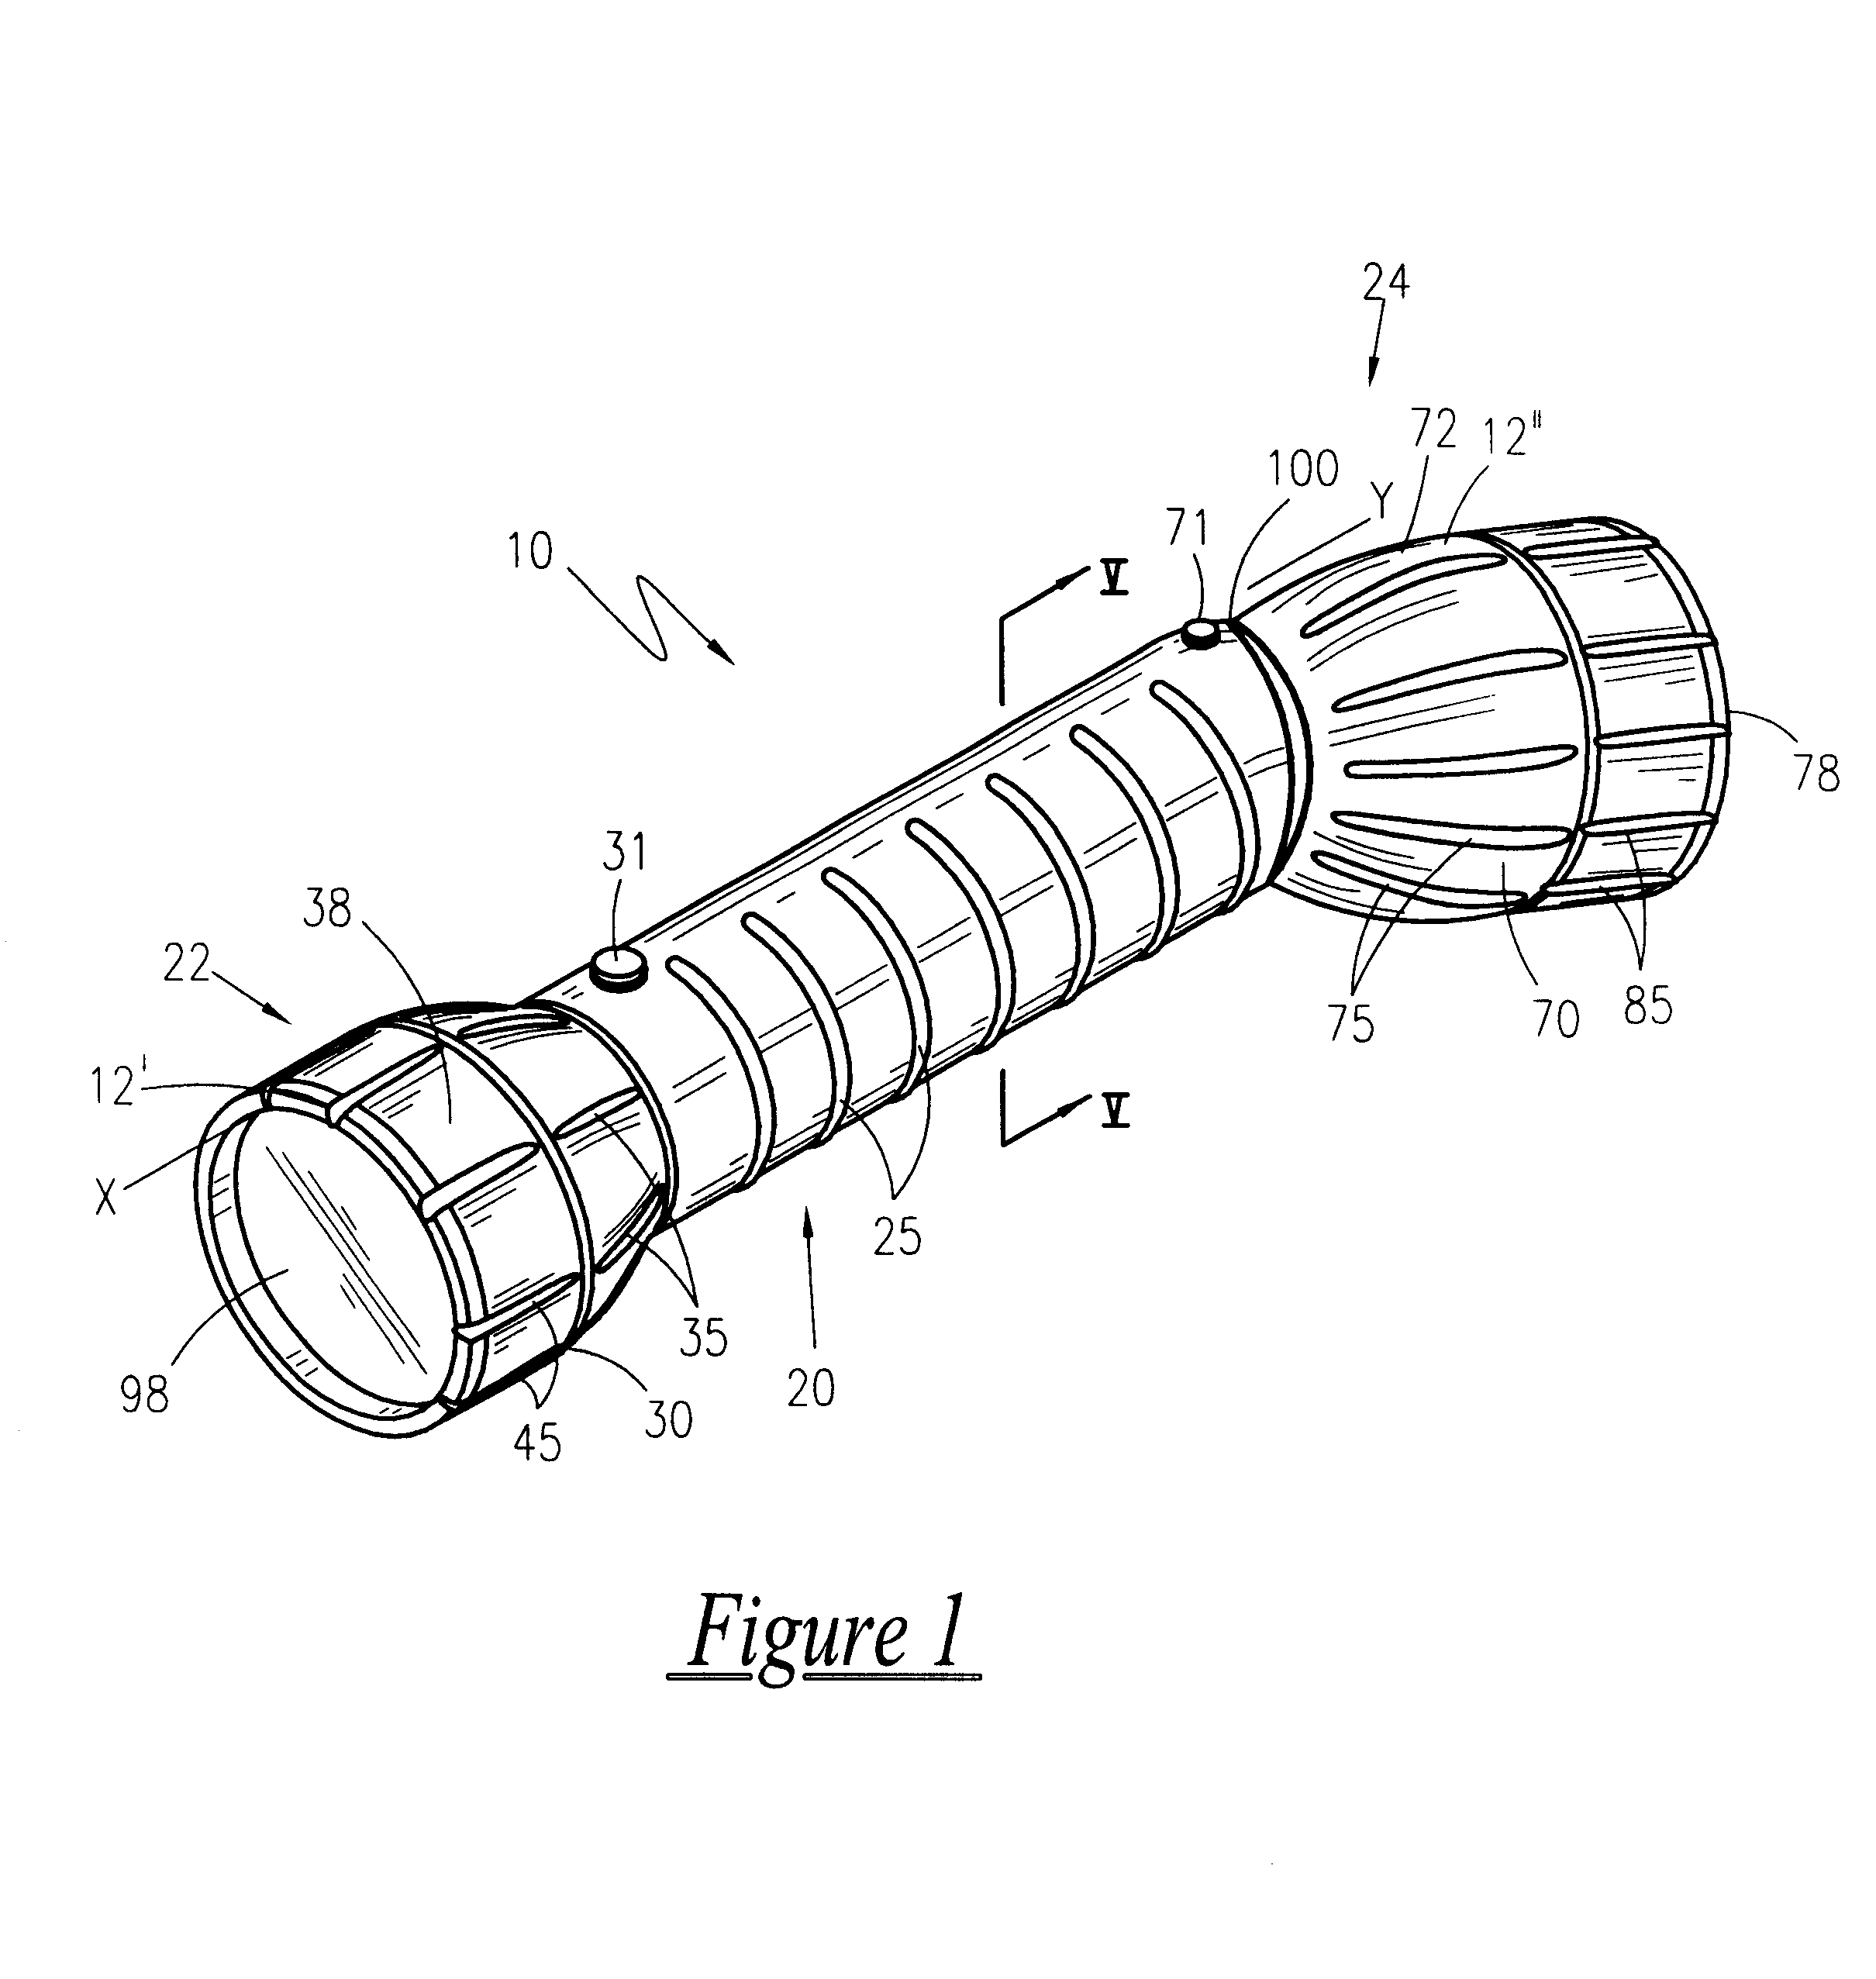 Dual-beam light assembly with adjustable posterior head